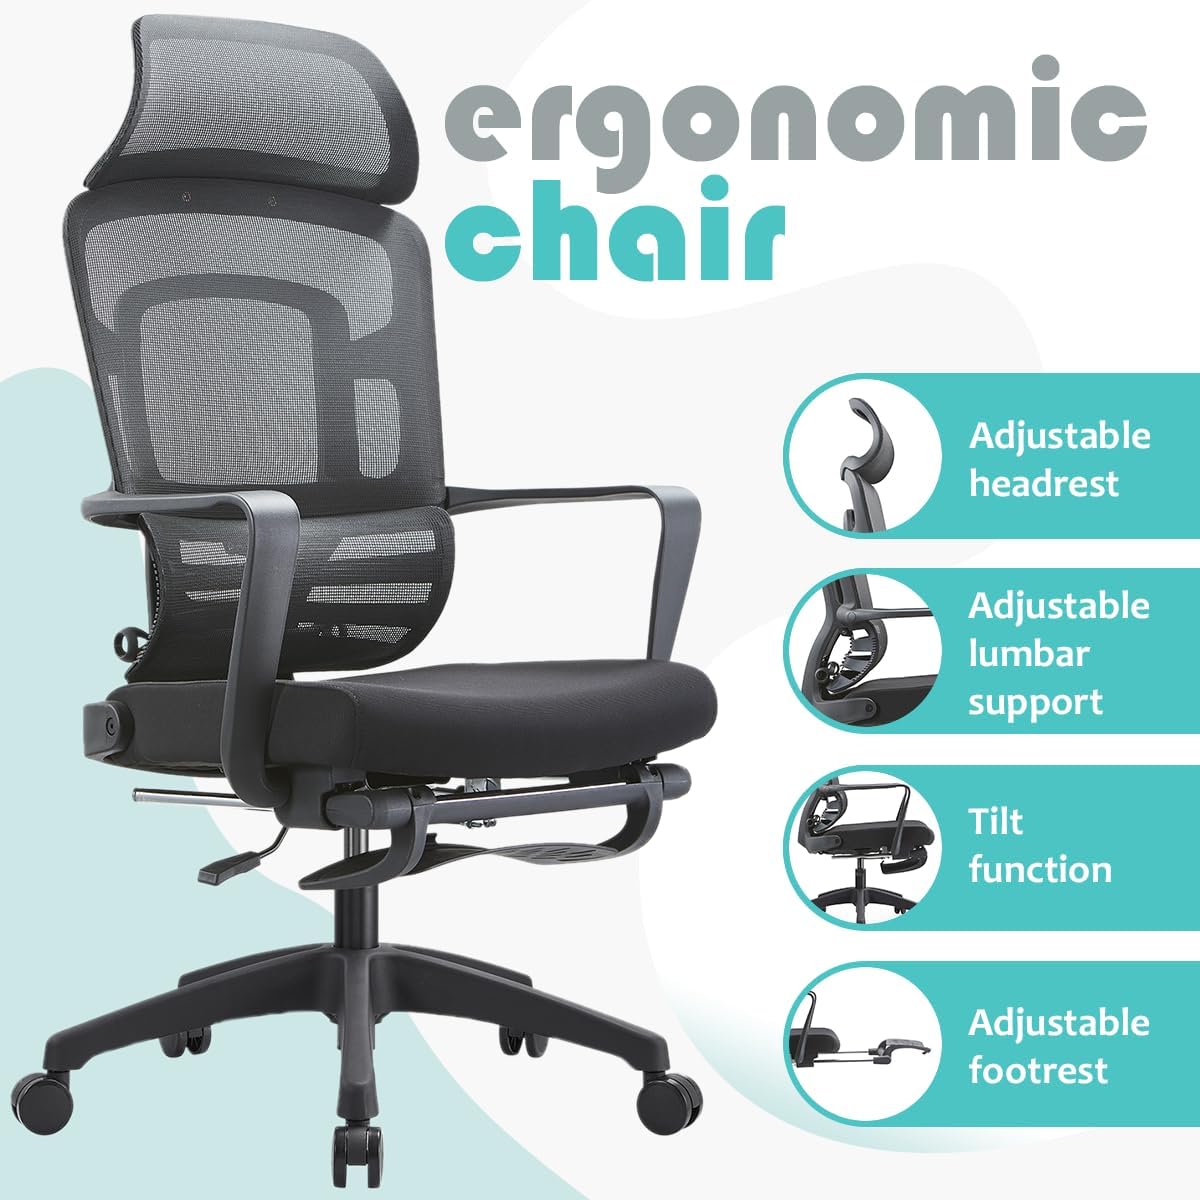 Ergonomic office chair, Retractable Footrest and Adjustable back support, Chair for Home Office, Adjustable rolling swivel office chair with armrest and headrest, Executive chair Black - COOLBABY